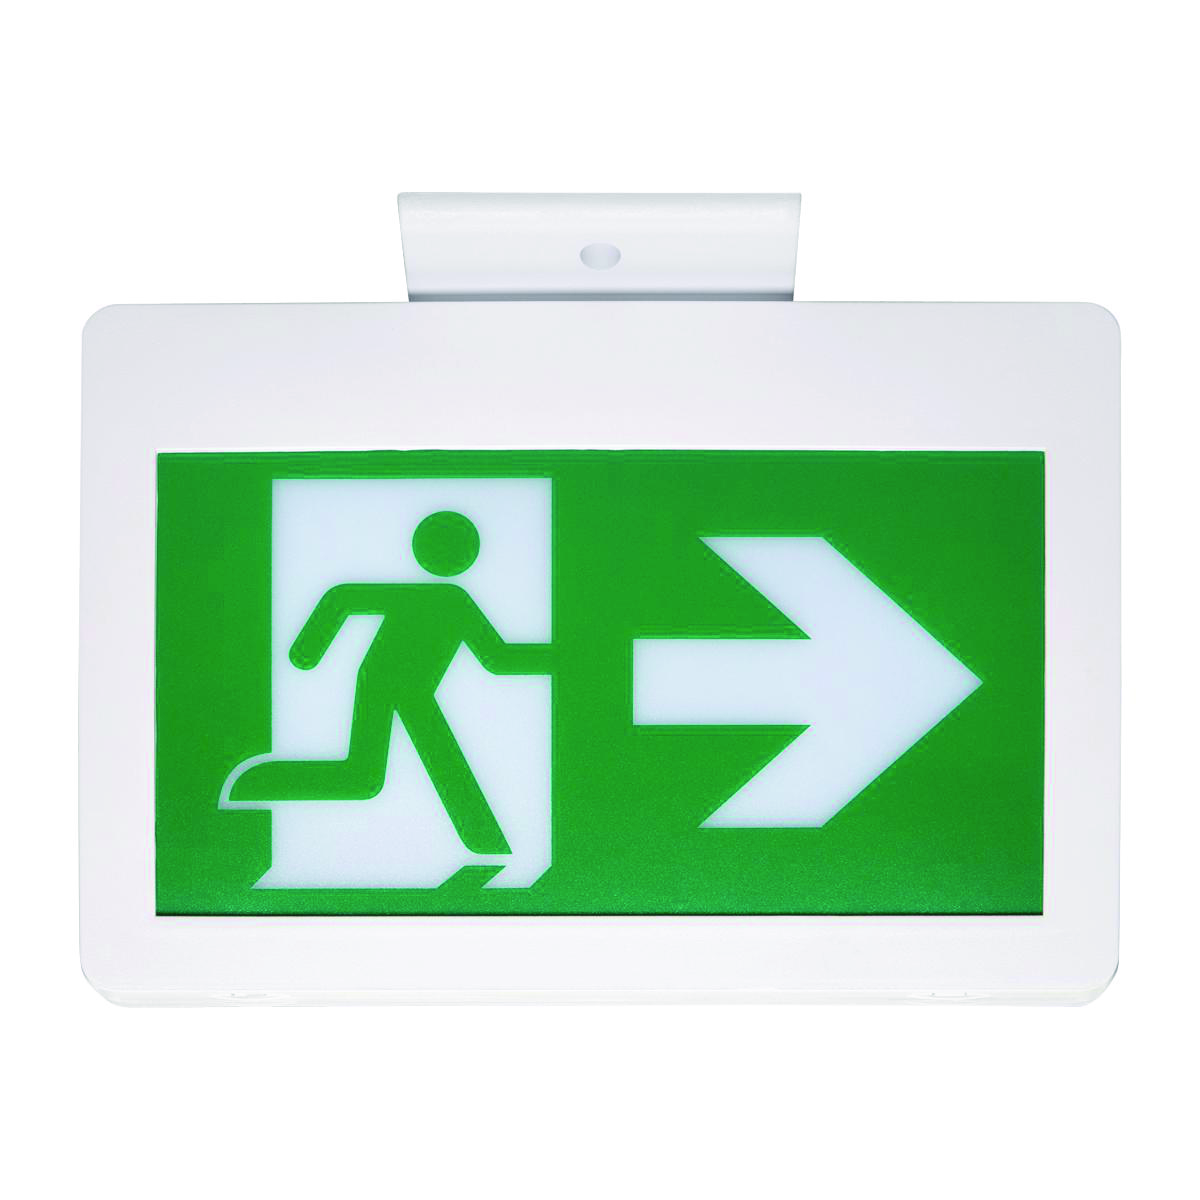 LED 3W Maintained Emergency Fire Exit Box Sign 3 Hour Light Shop Office Fitting 